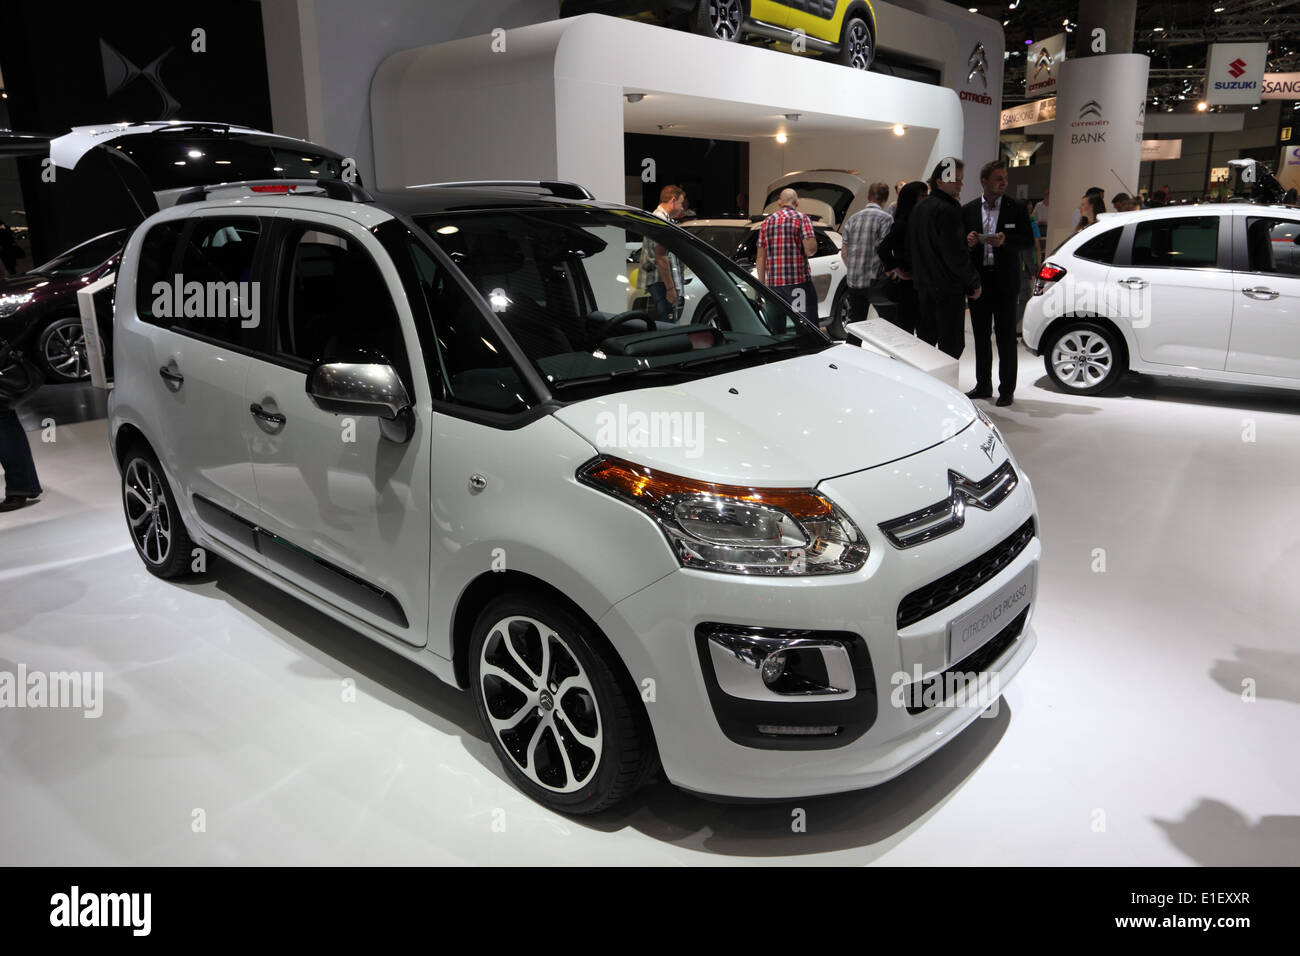 Citroen C3 Picasso van at the AMI - Auto Mobile International Trade Fair on June 1st, 2014 in Leipzig, Saxony, Germany Stock Photo